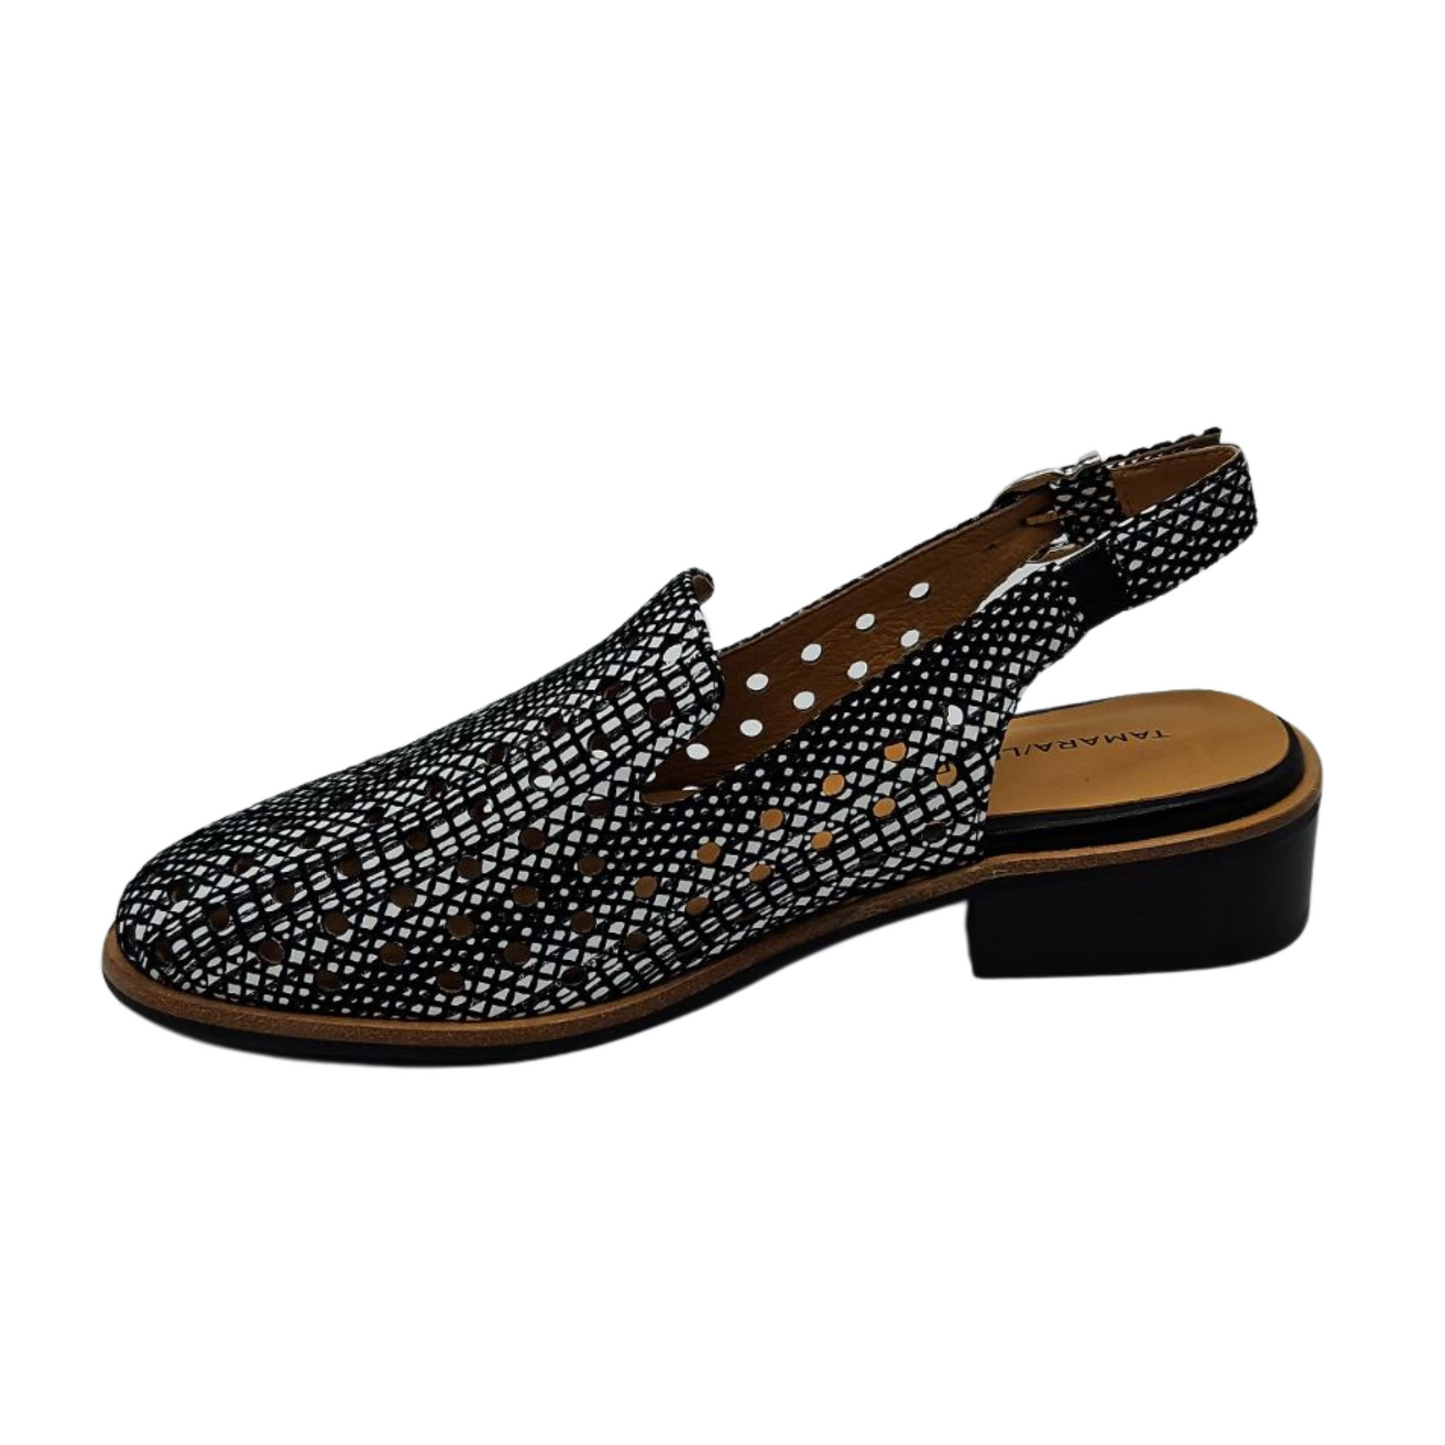 Left facing view of perforated leather shoe with slingback strap, low heel and rounded toe